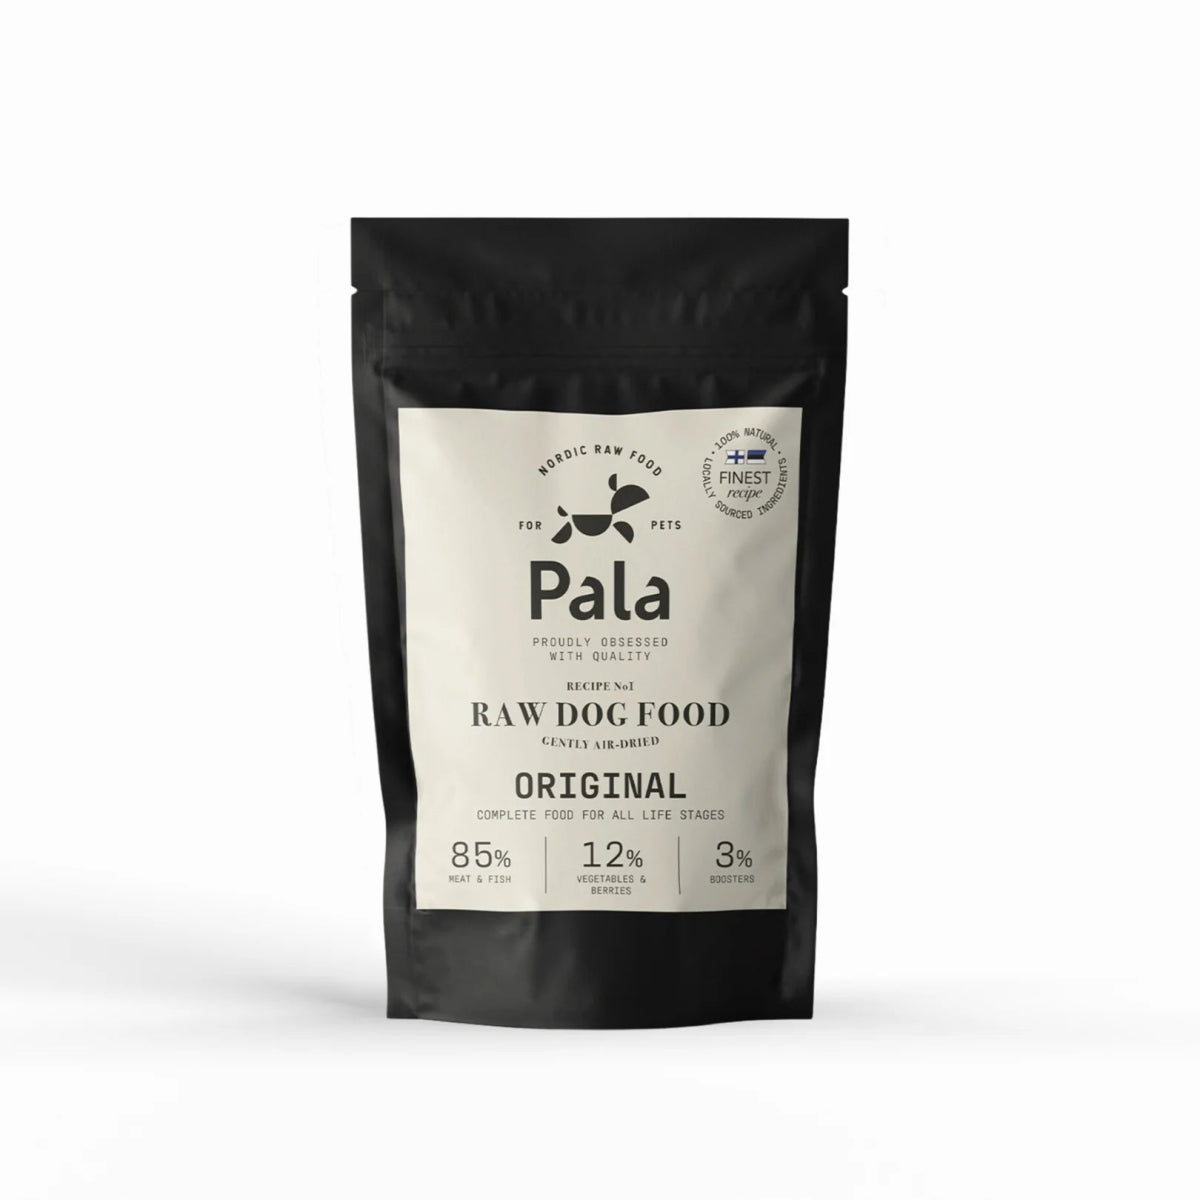 PALA RAW DOG FOOD, Original, 100% Natural Air-Dried Complete Food for Dogs - Okidogi.store